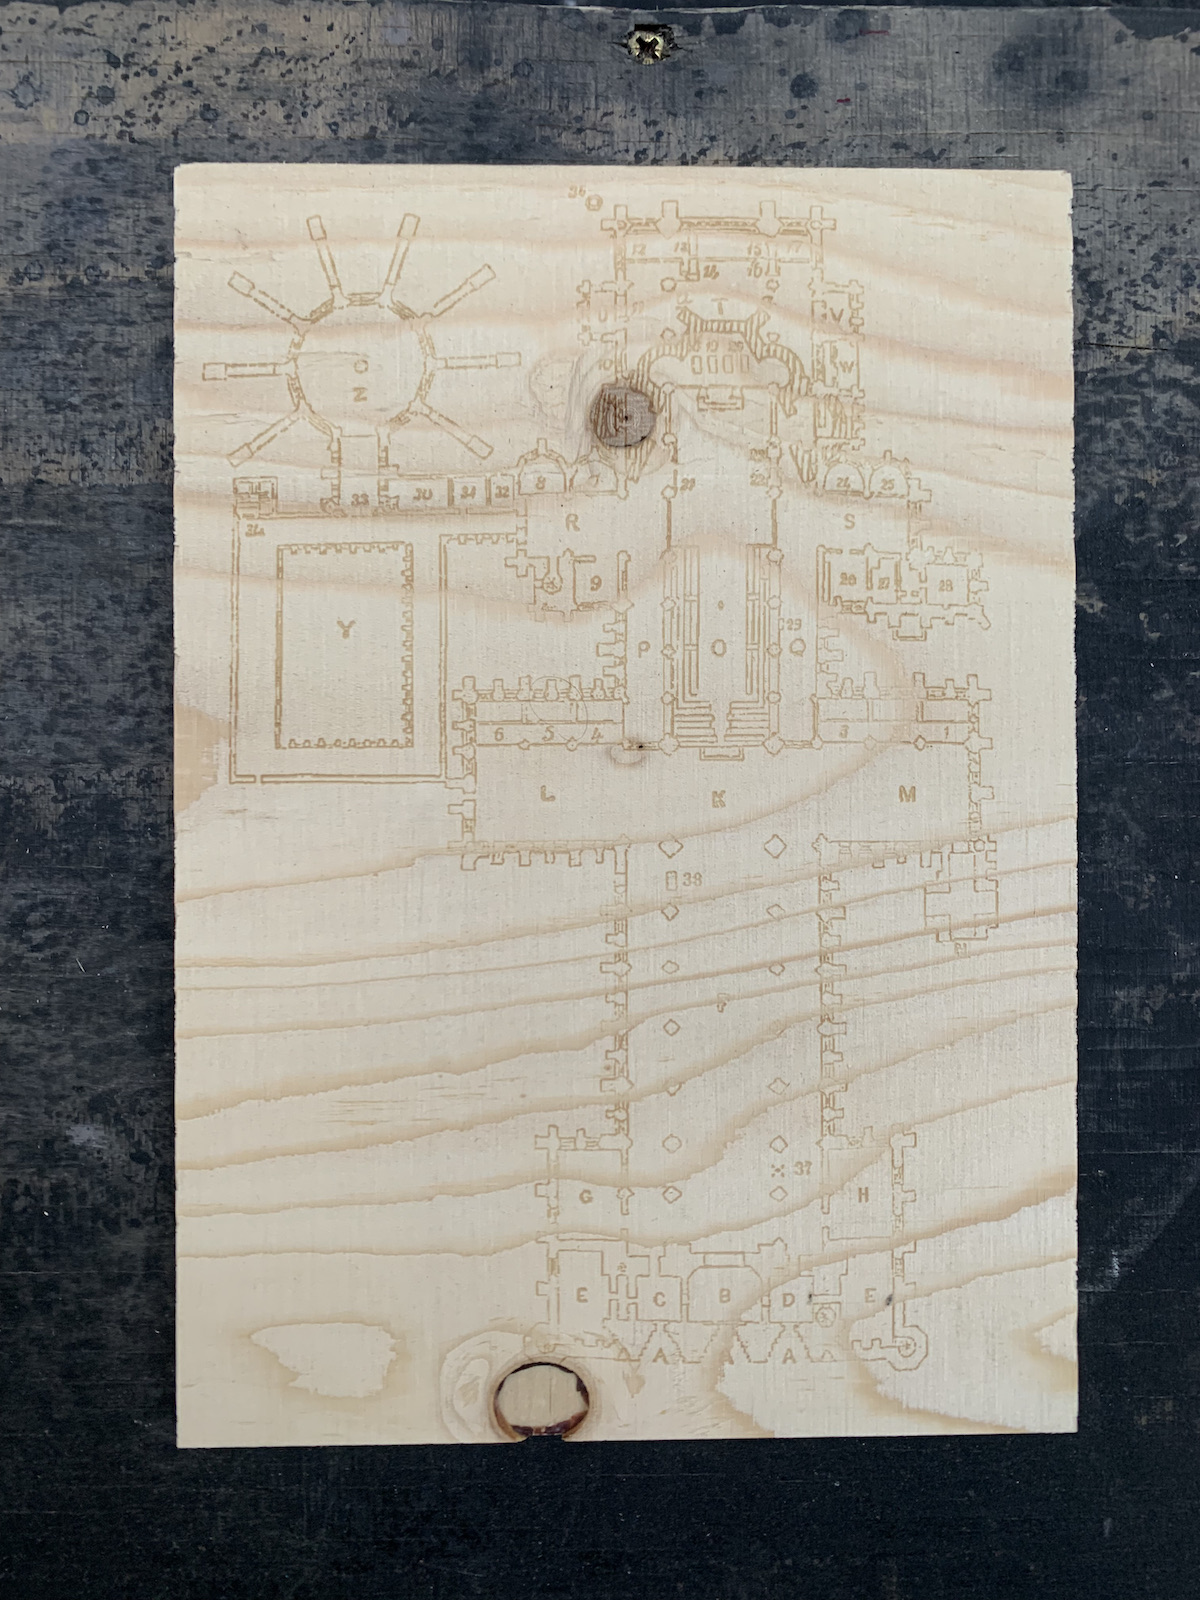 The floorpan for a structure, laser-etched onto plywood.